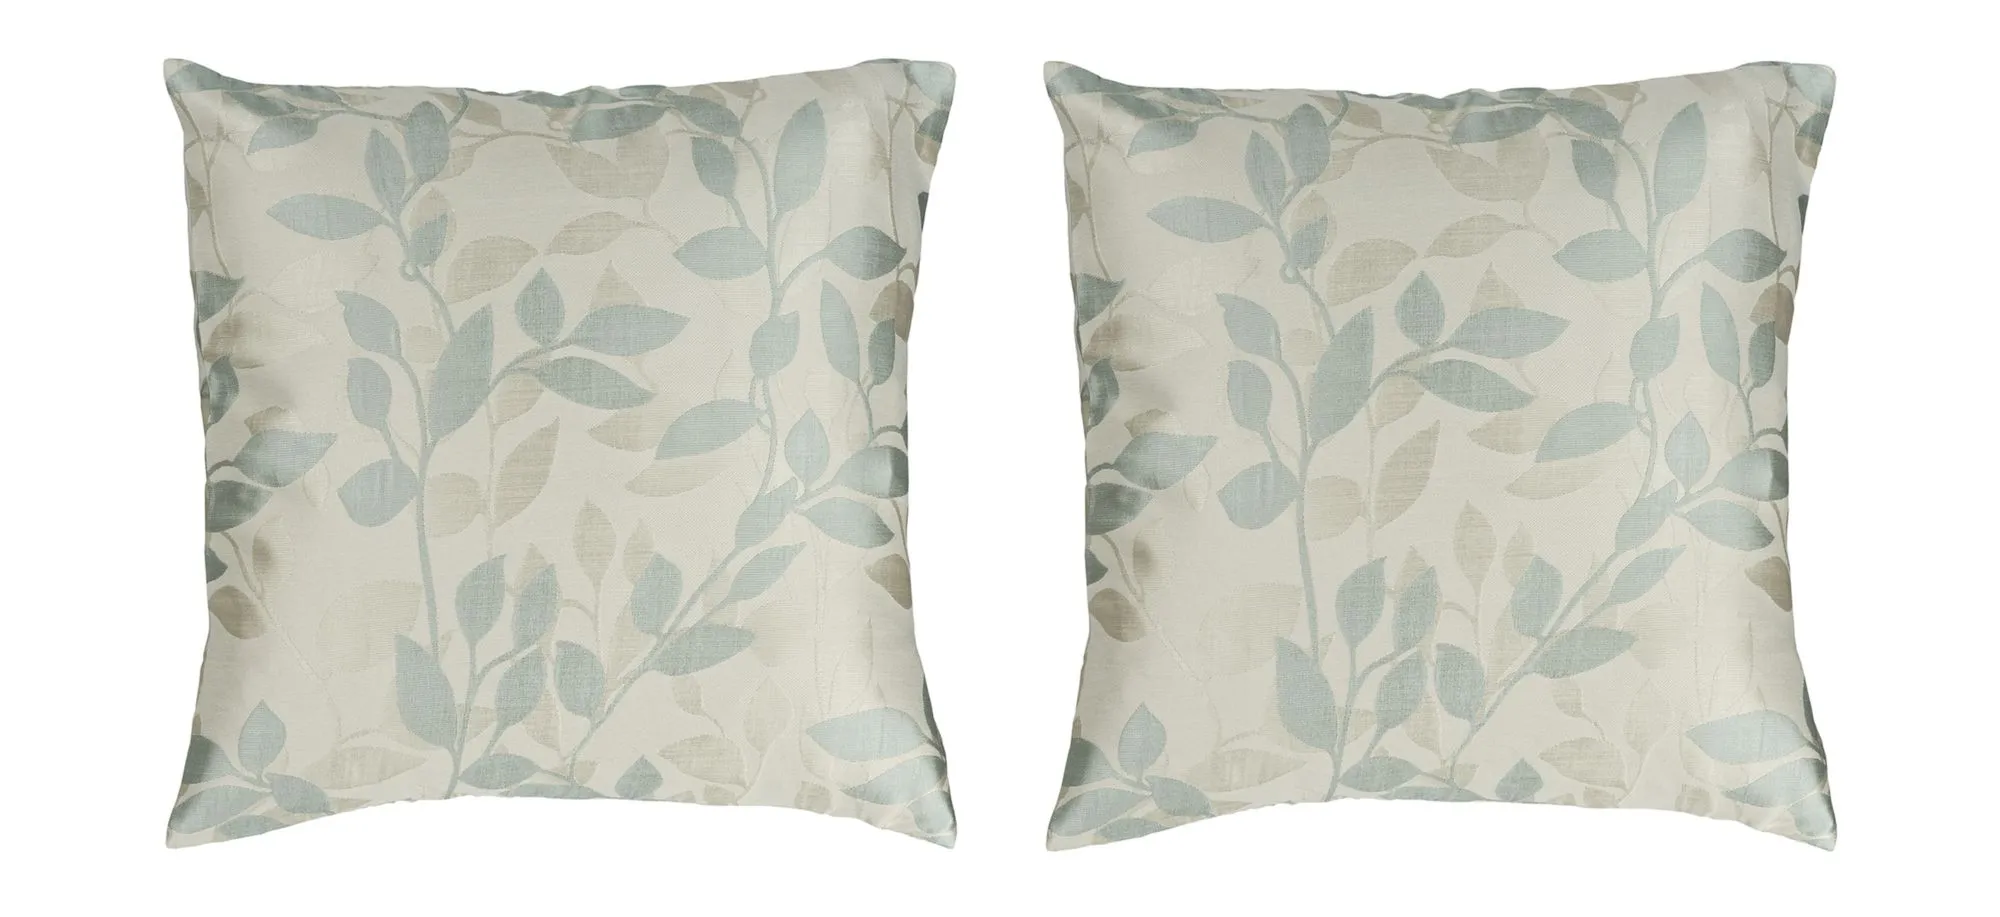 Wind Chime 22" Throw Pillow Set - 2 Pc. in Cream, Ivory, Sea Foam by Surya